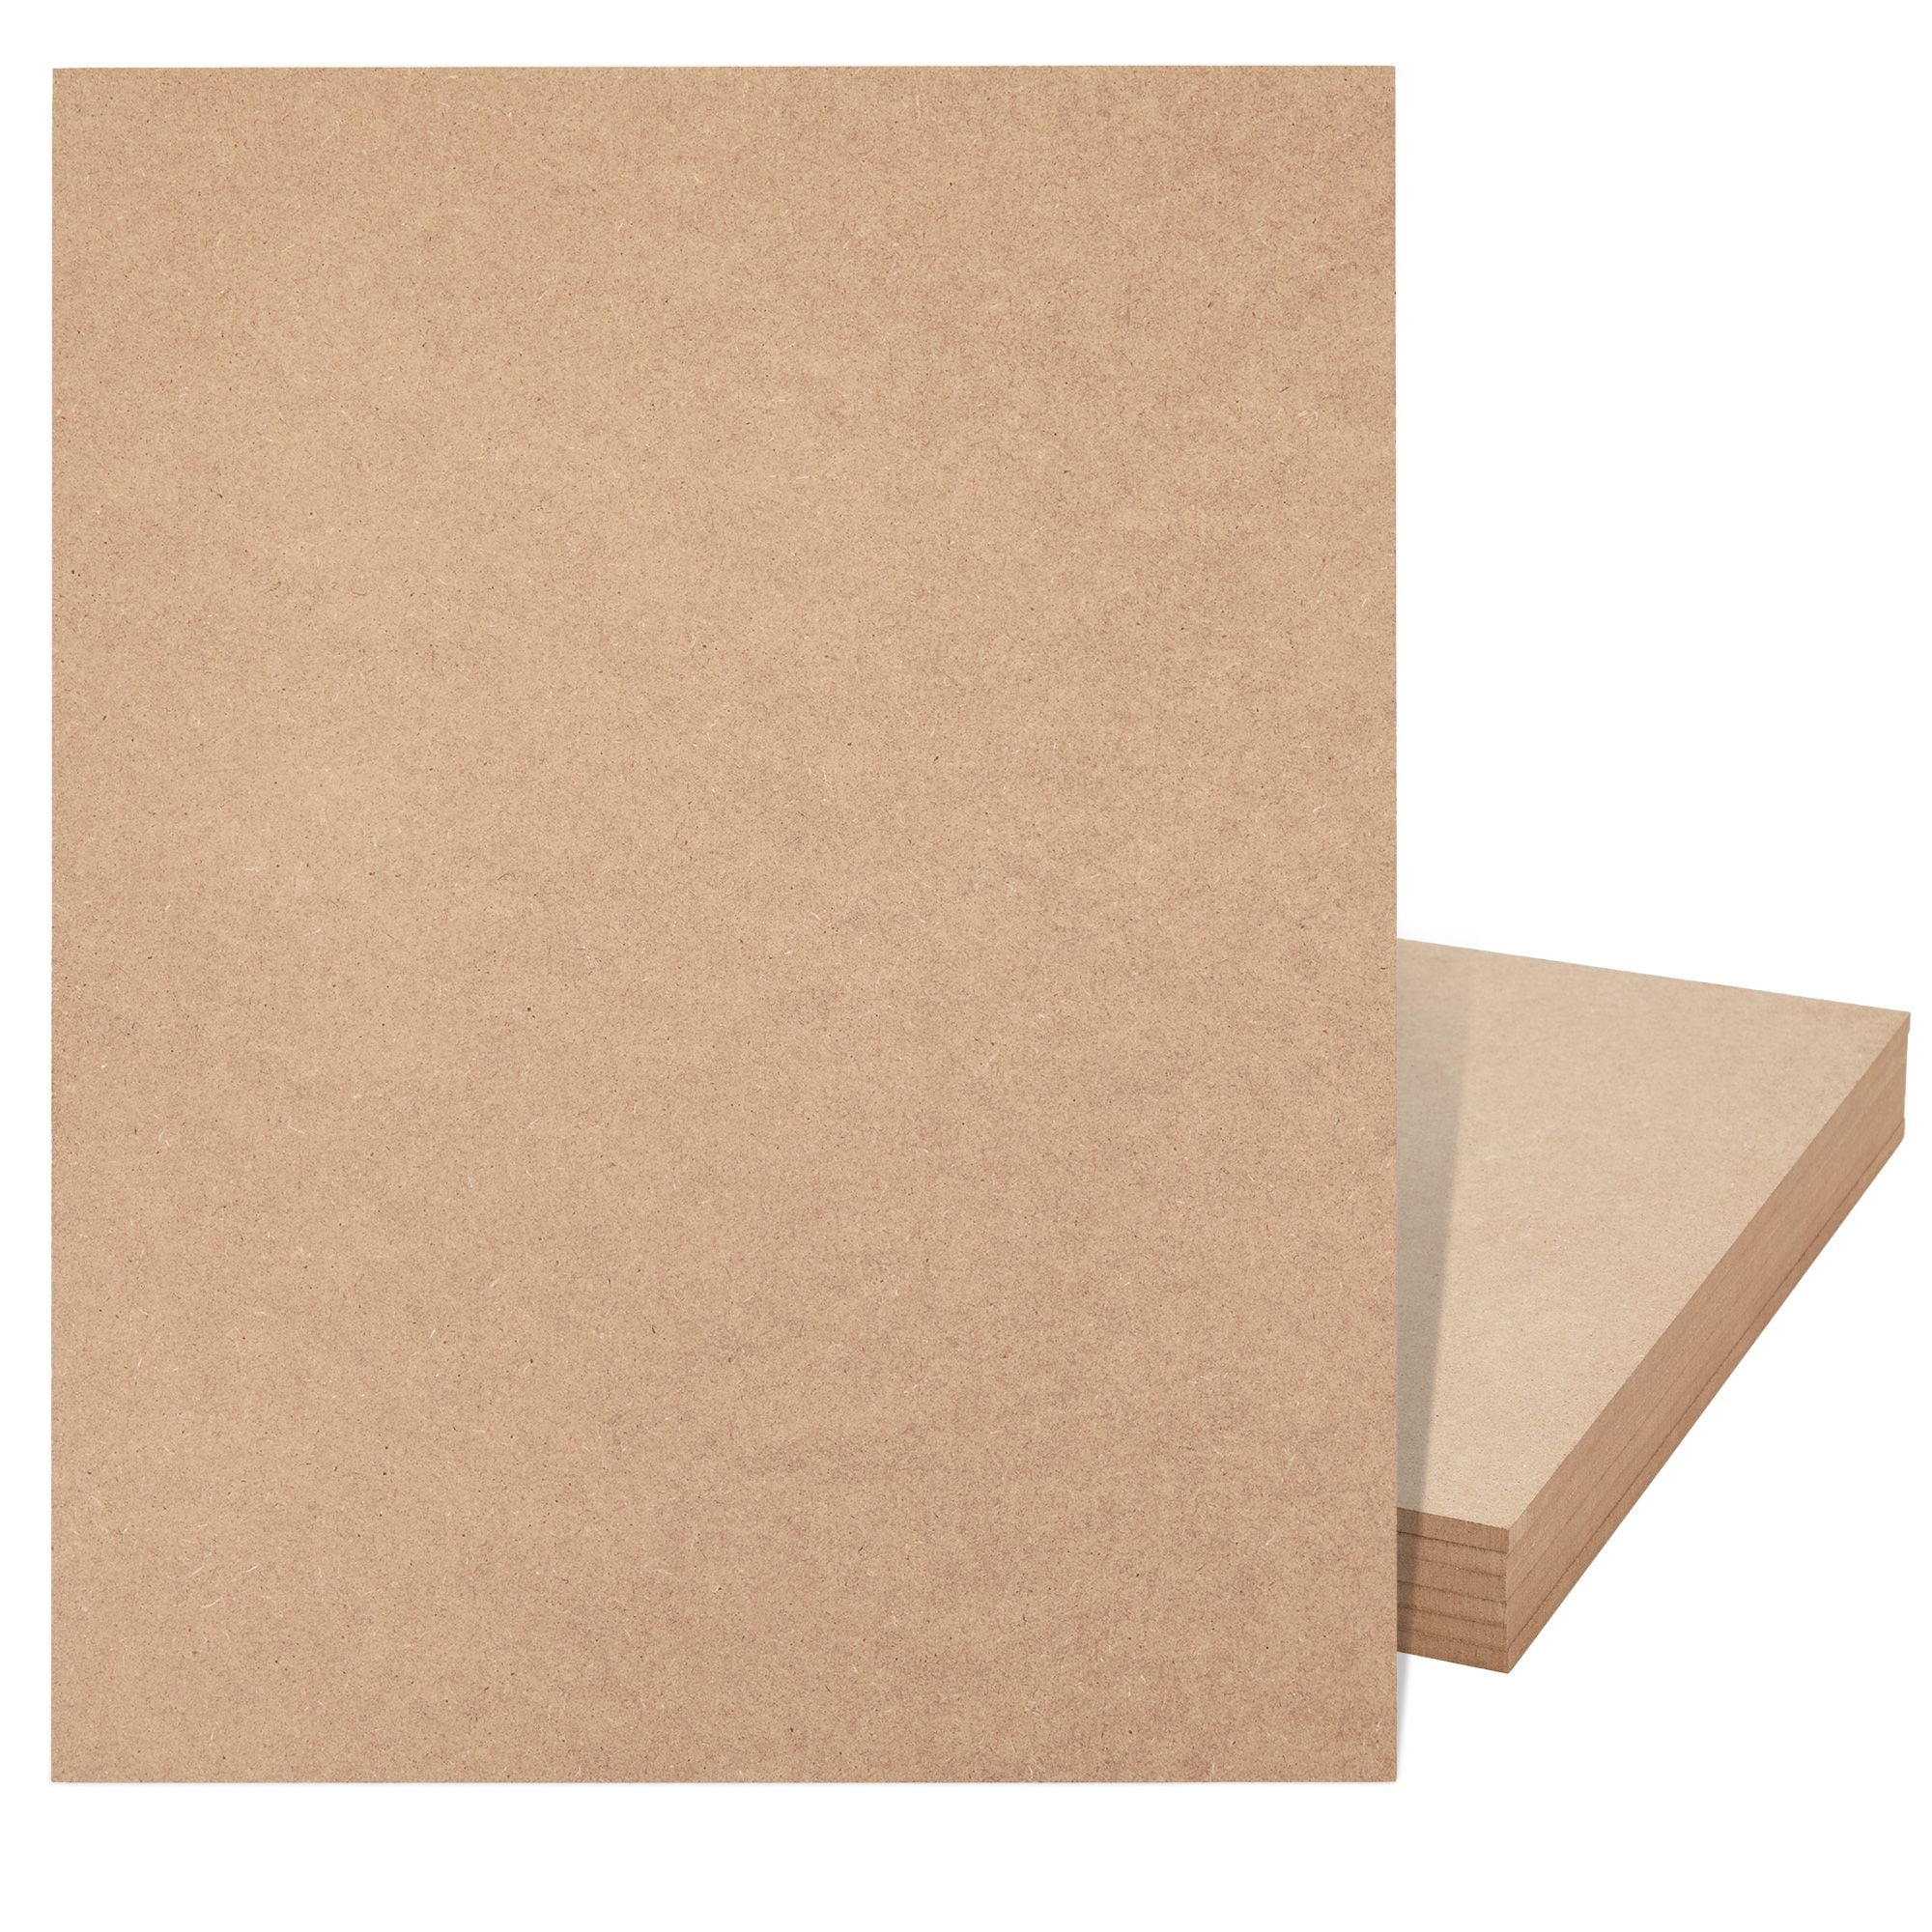  Chipboard Sheets 8.5 x 11 - 100 Sheets of 22 Point Chip Board  for Crafts - This Kraft Board is a Great Alternative to MDF Board and Cardboard  Sheets